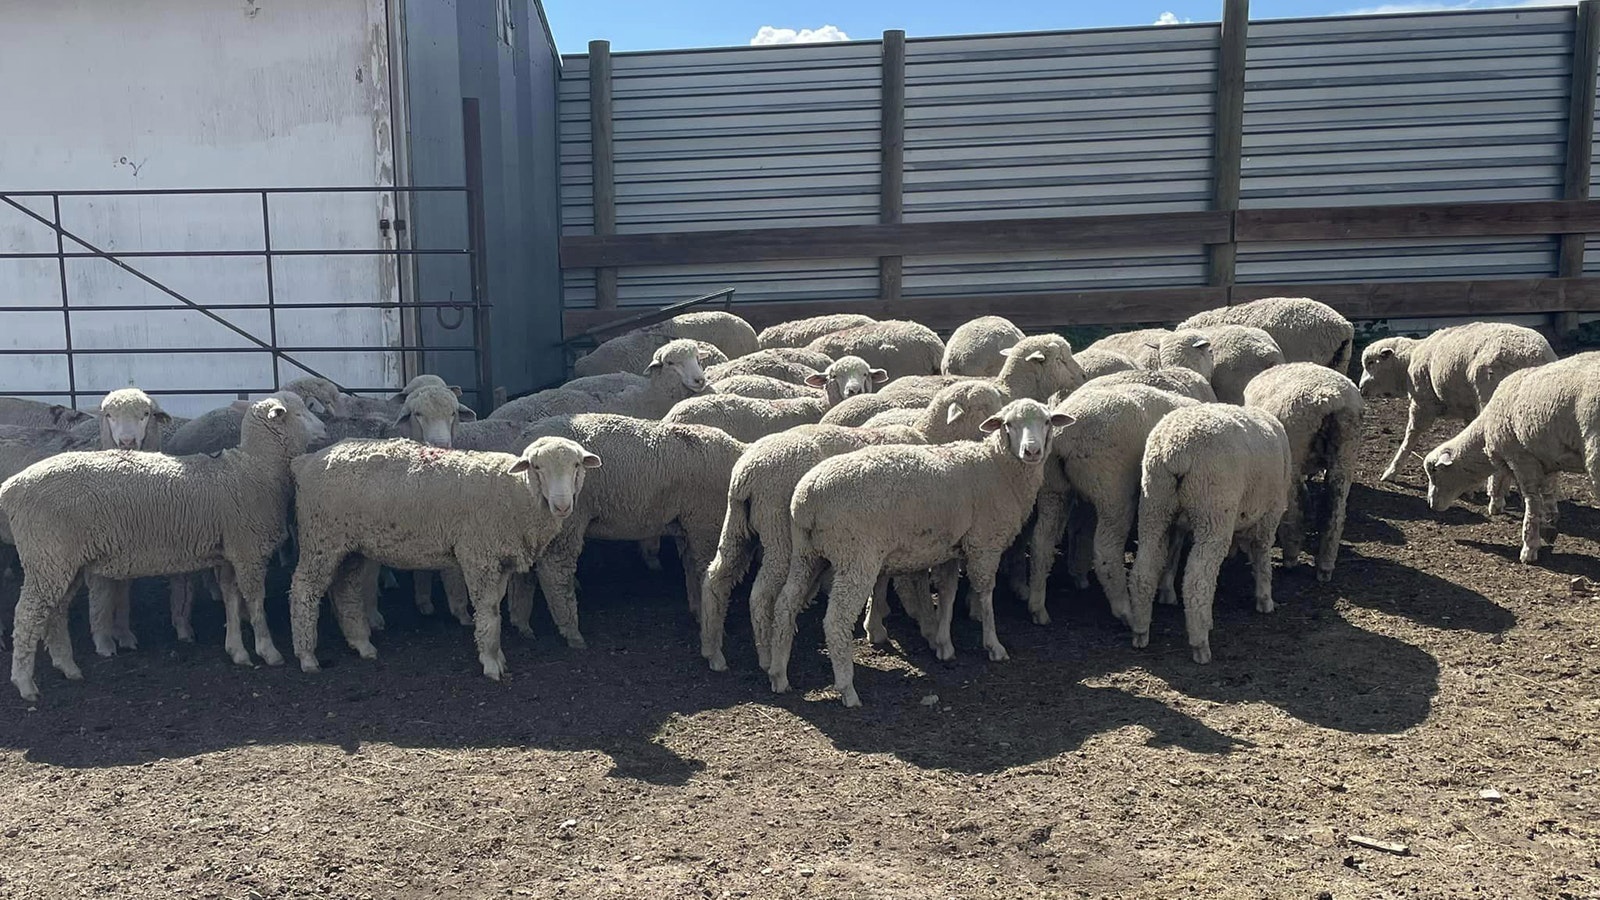 Campbell County rancher Guy Edwards was surprised after 70 sheep were rustled from his northern Wyoming ranch that 48 of them were returned shortly after.